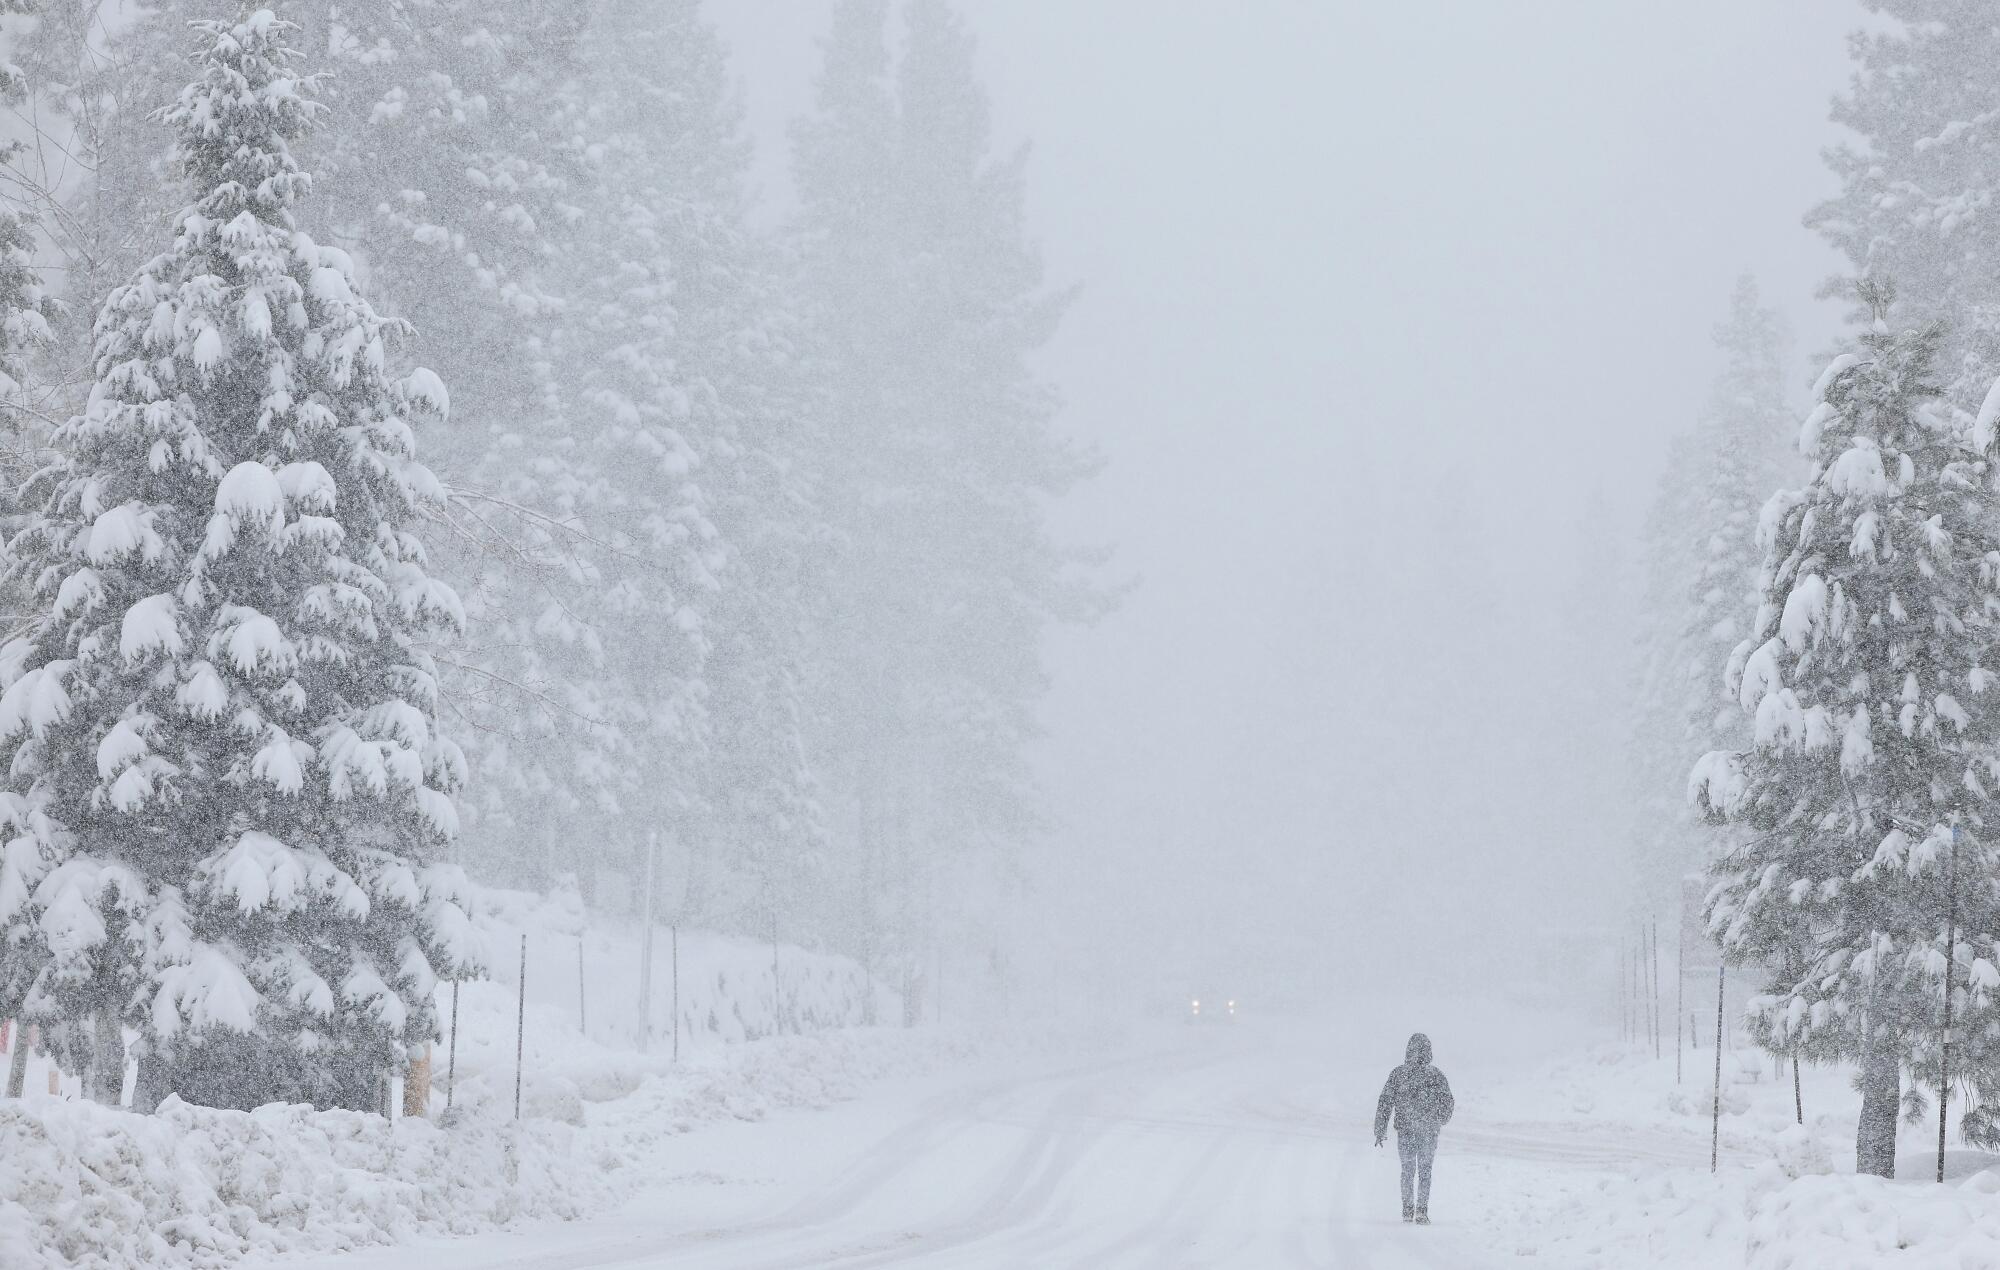 A person walks along a snow-covered path flanked by snow-covered pine trees as snow falls.